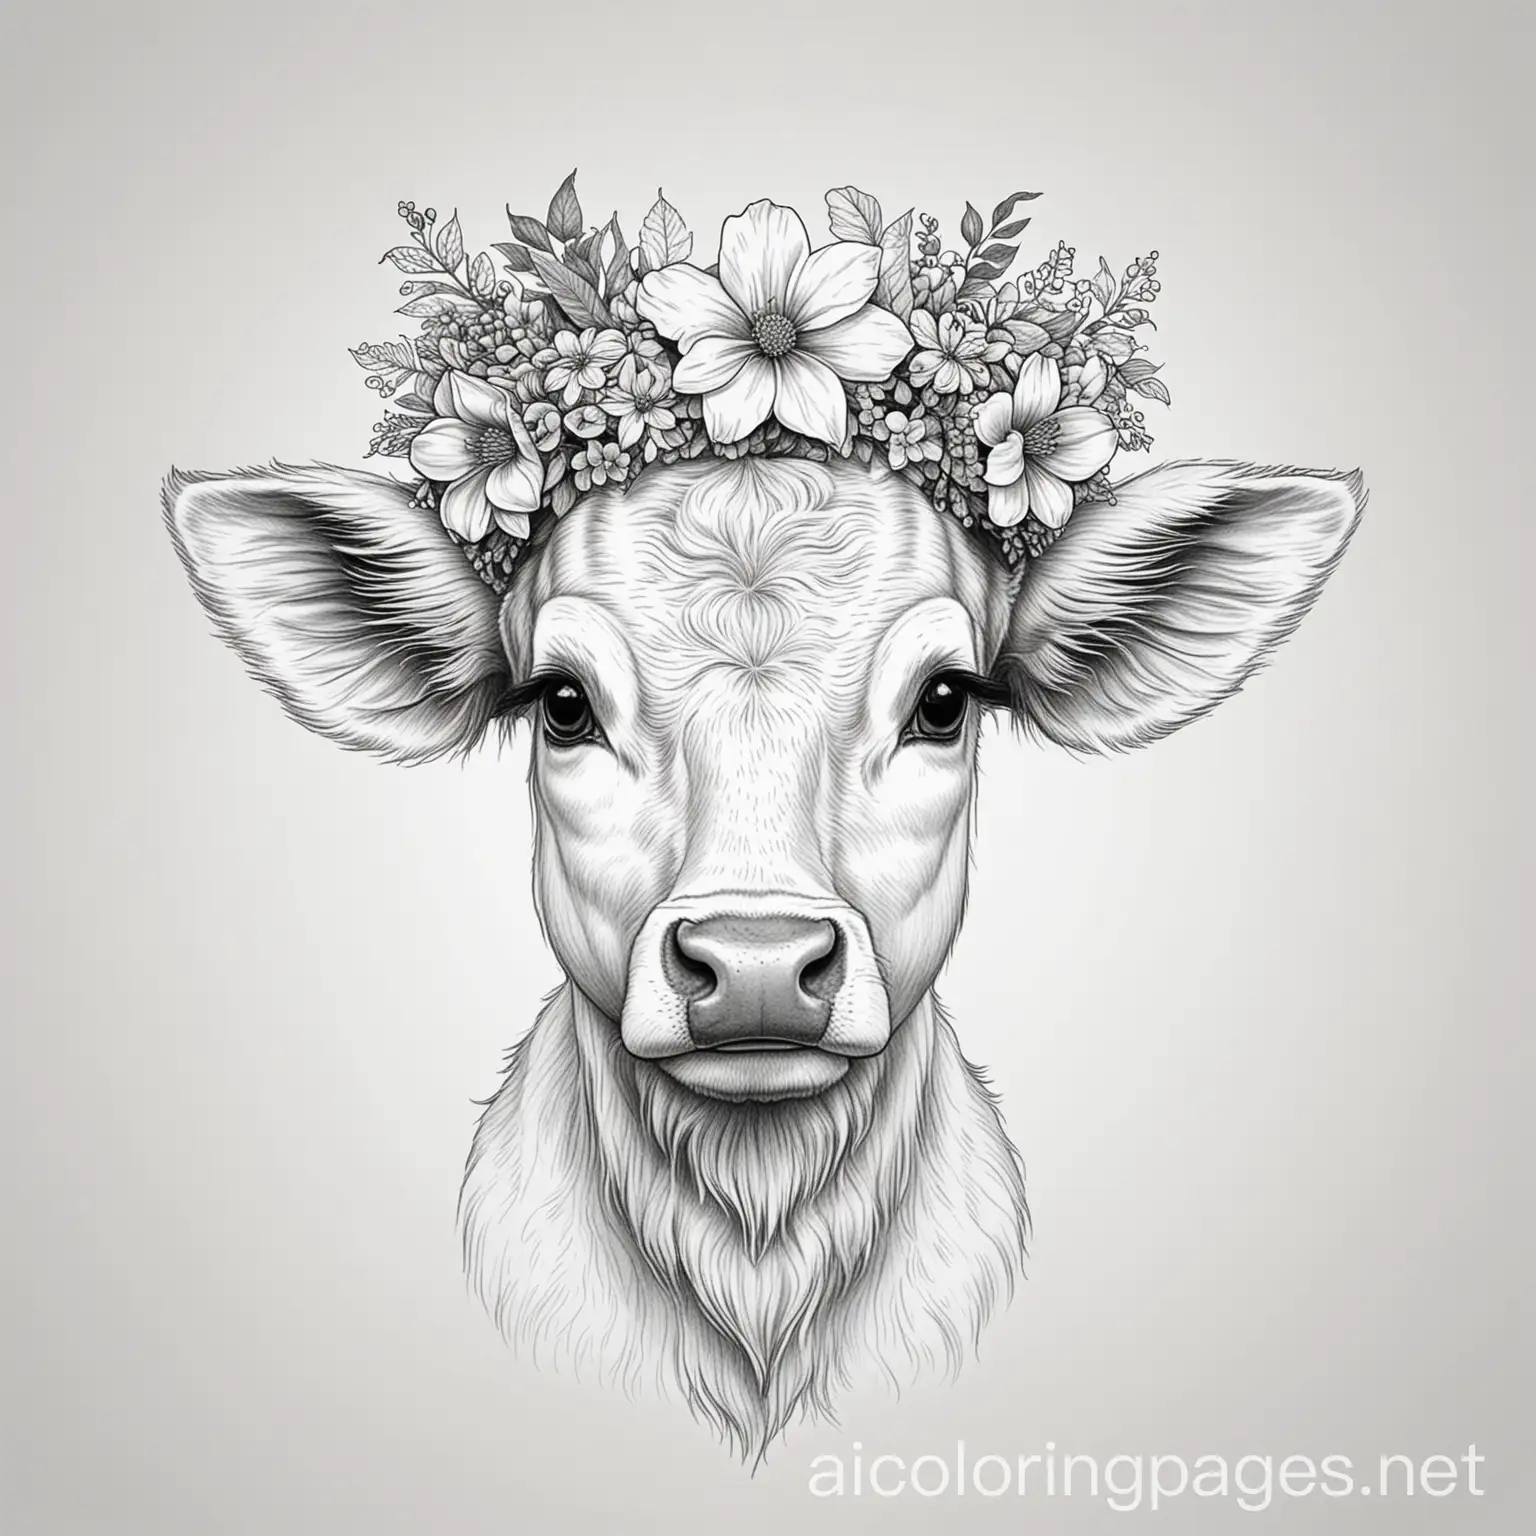 calf wearing flower wreath crown coloring page, Coloring Page, black and white, line art, white background, Simplicity, Ample White Space. The background of the coloring page is plain white to make it easy for young children to color within the lines. The outlines of all the subjects are easy to distinguish, making it simple for kids to color without too much difficulty